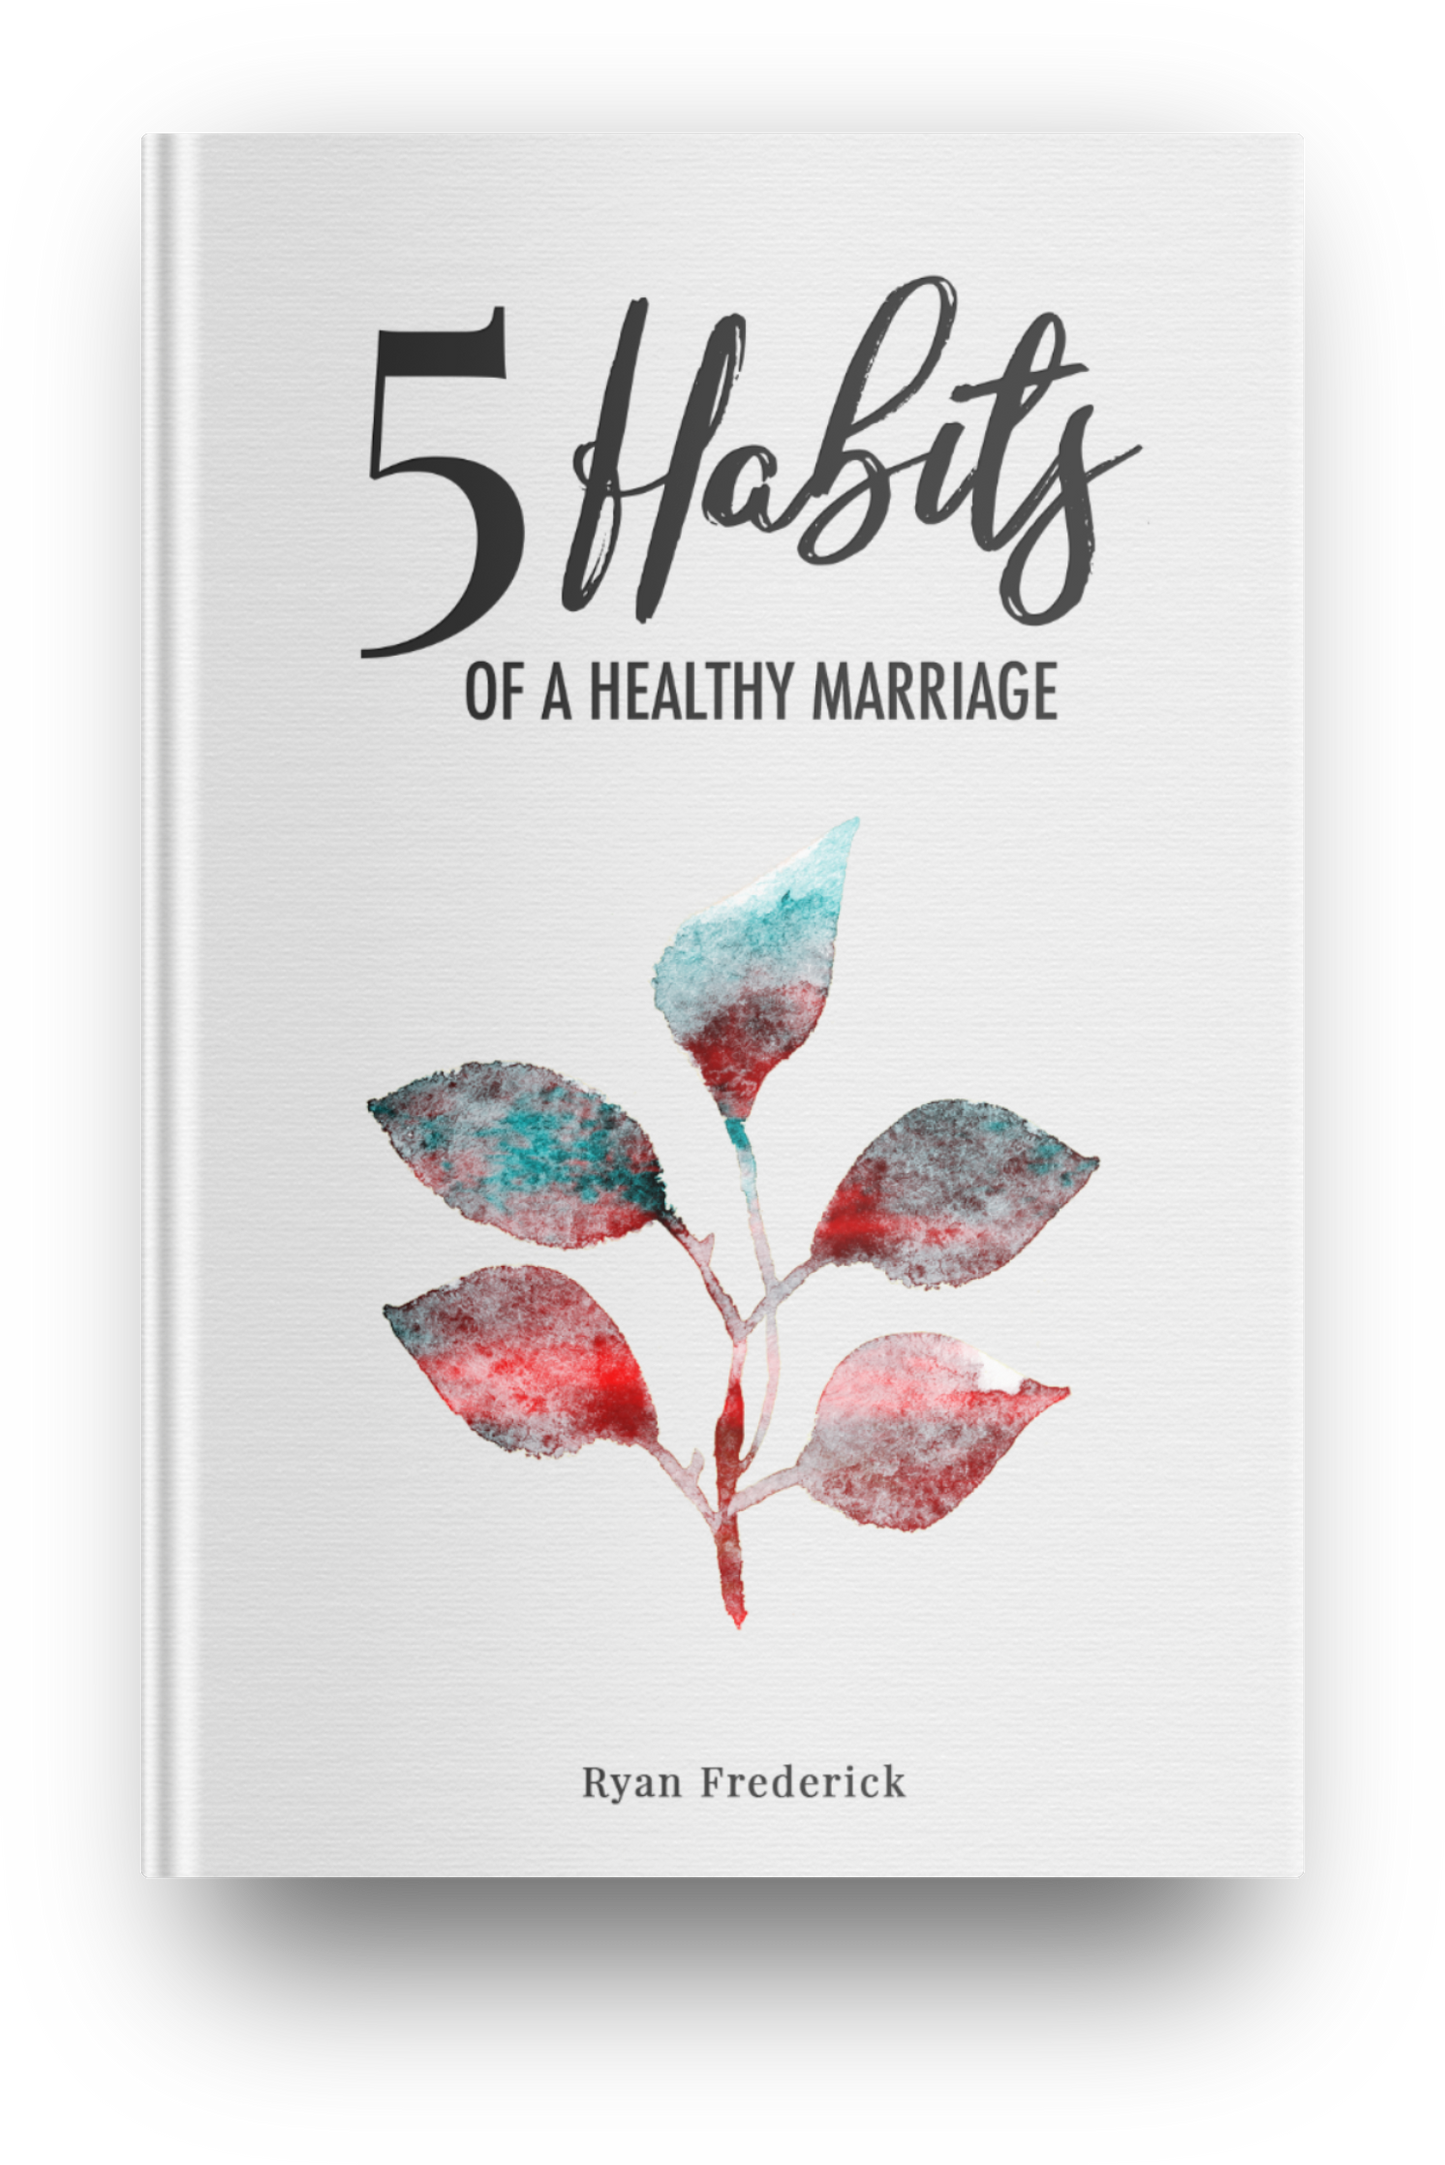 5 Habits of a Healthy Marriage